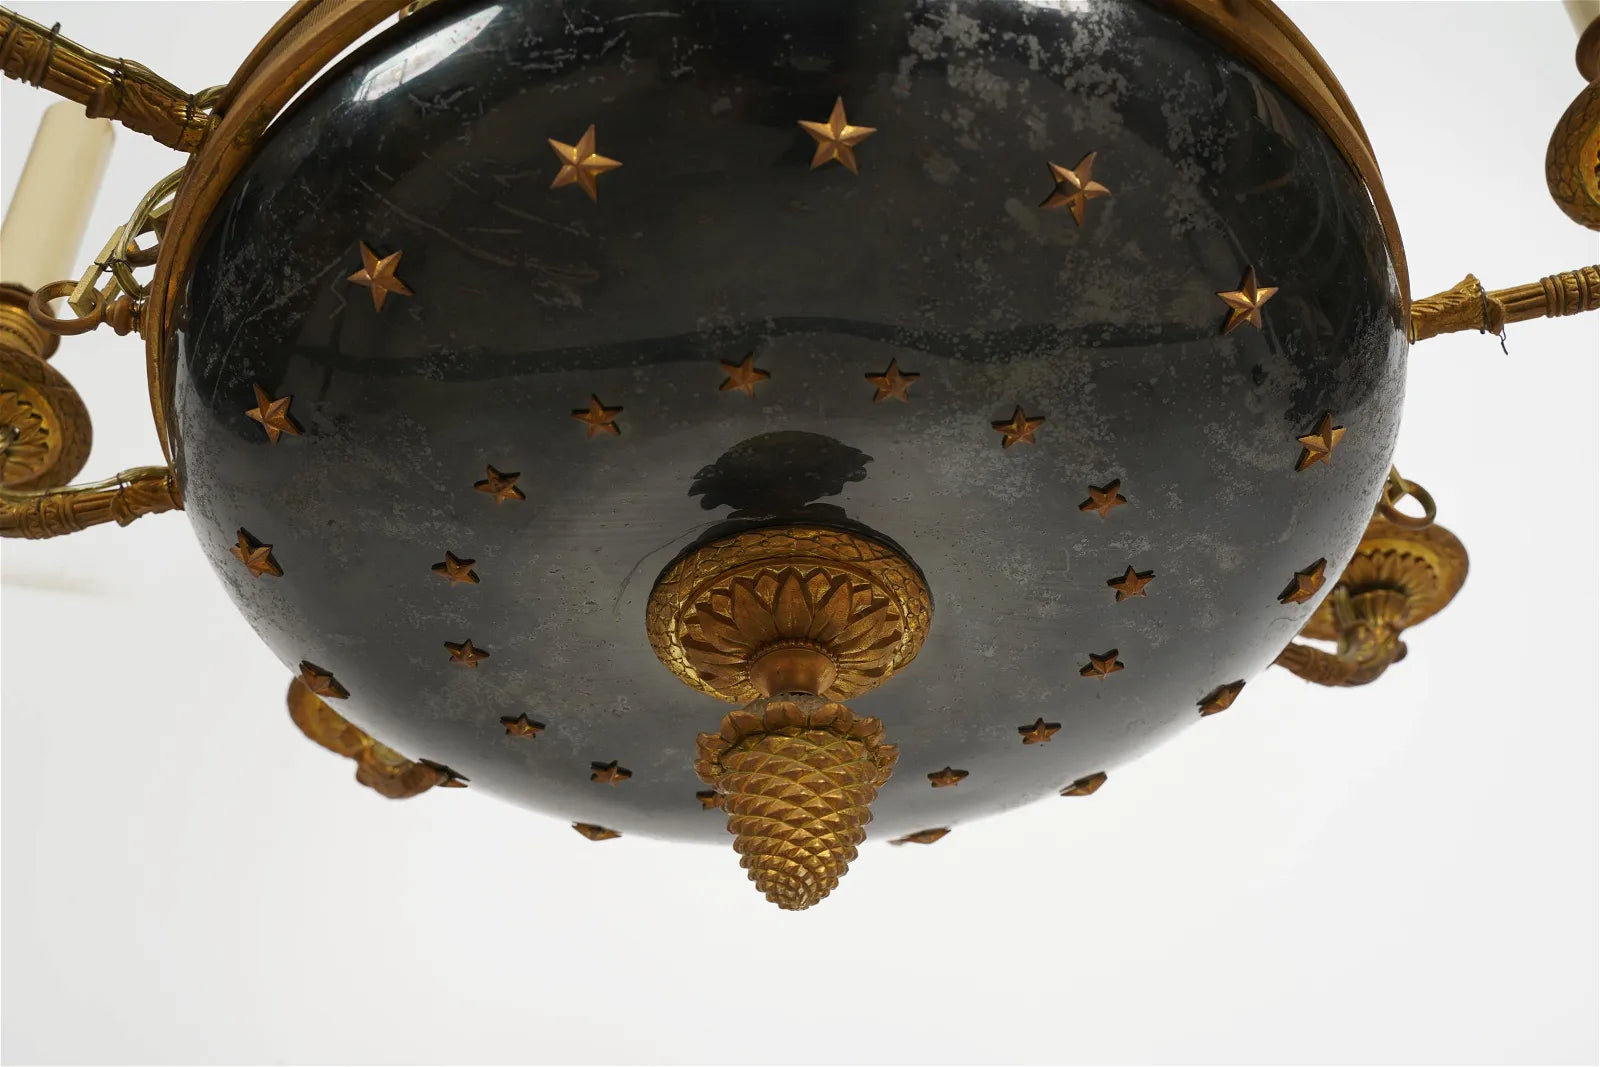 AL1-065: LATE 19TH CENTURY FRENCH EMPIRE STYLE GILT METAL 8 LIGHT CHANDELIER